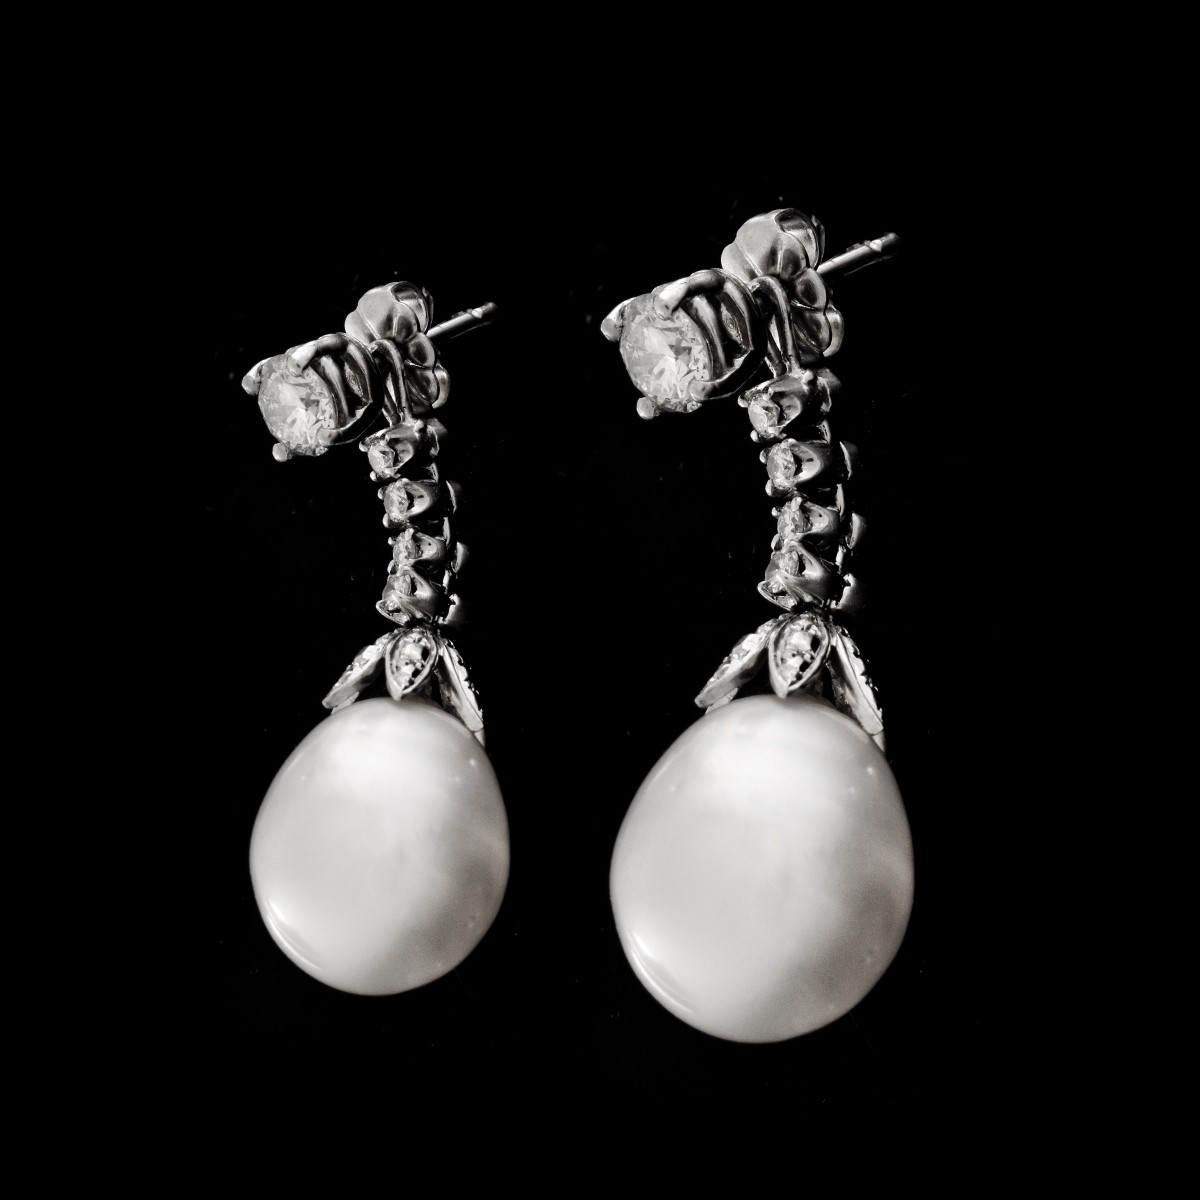 Antique Pearl and Diamond Pendant Earrings